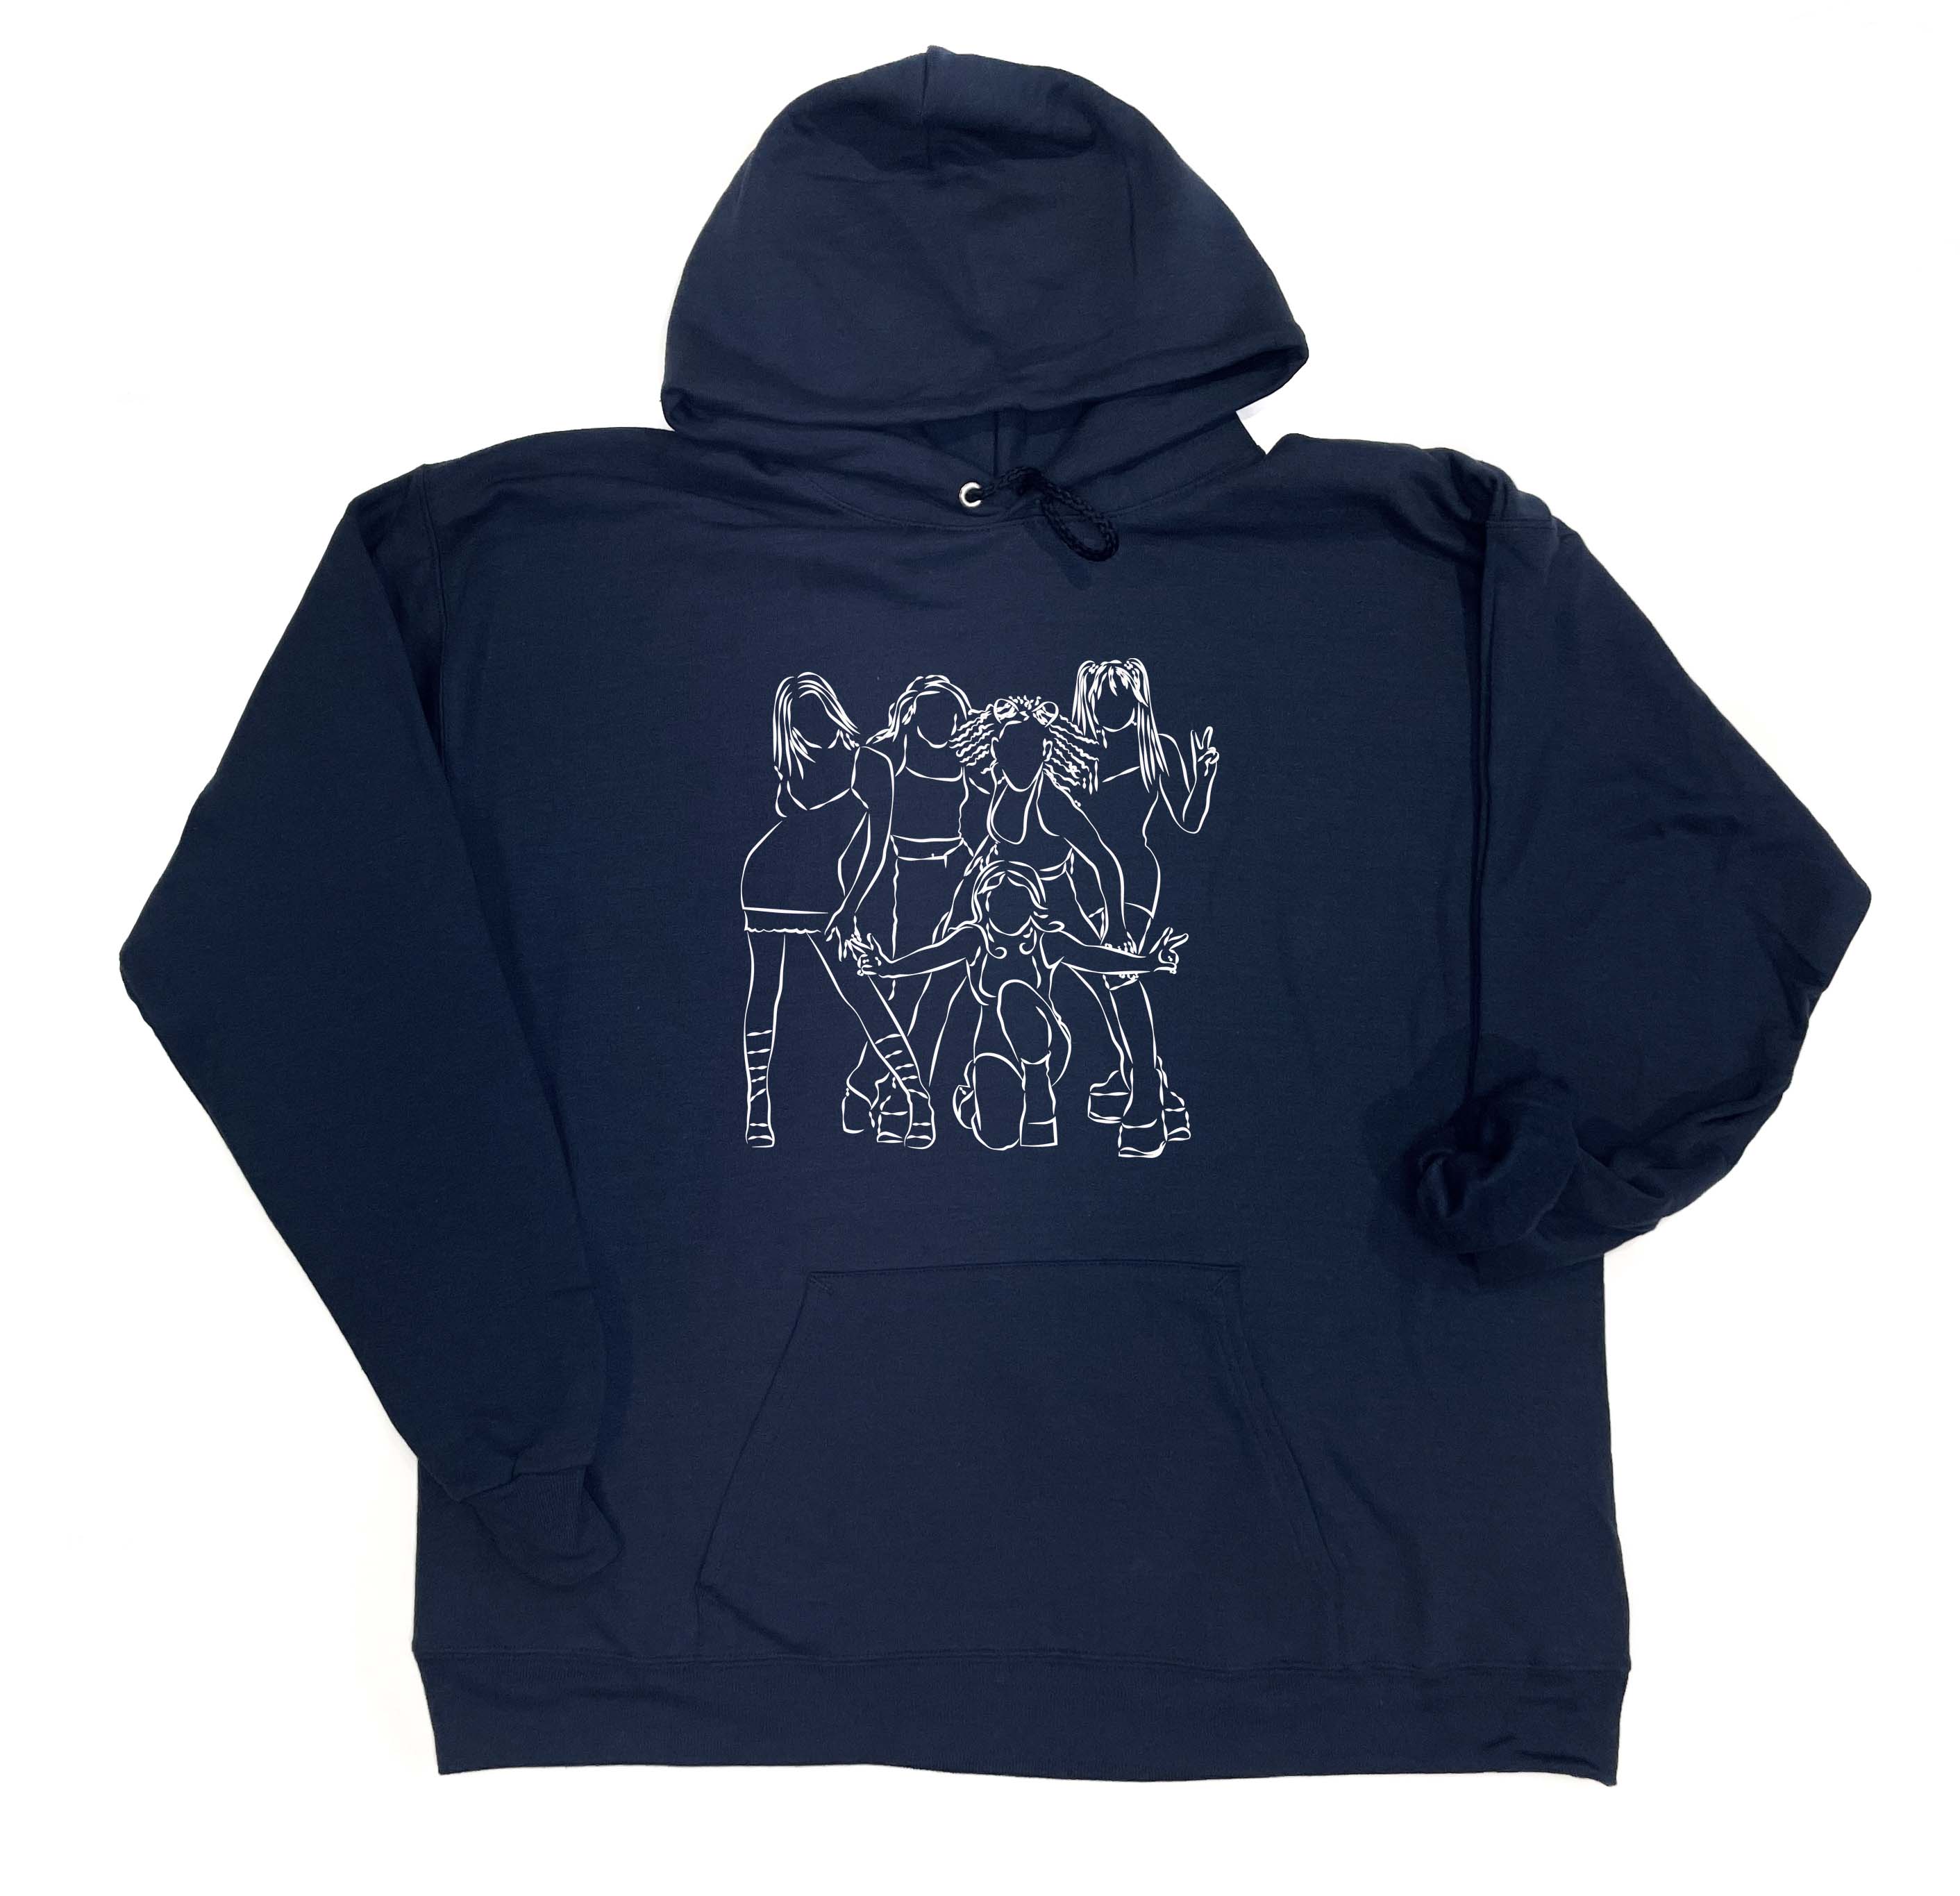 COLORS OF THE WORLD HOODIE